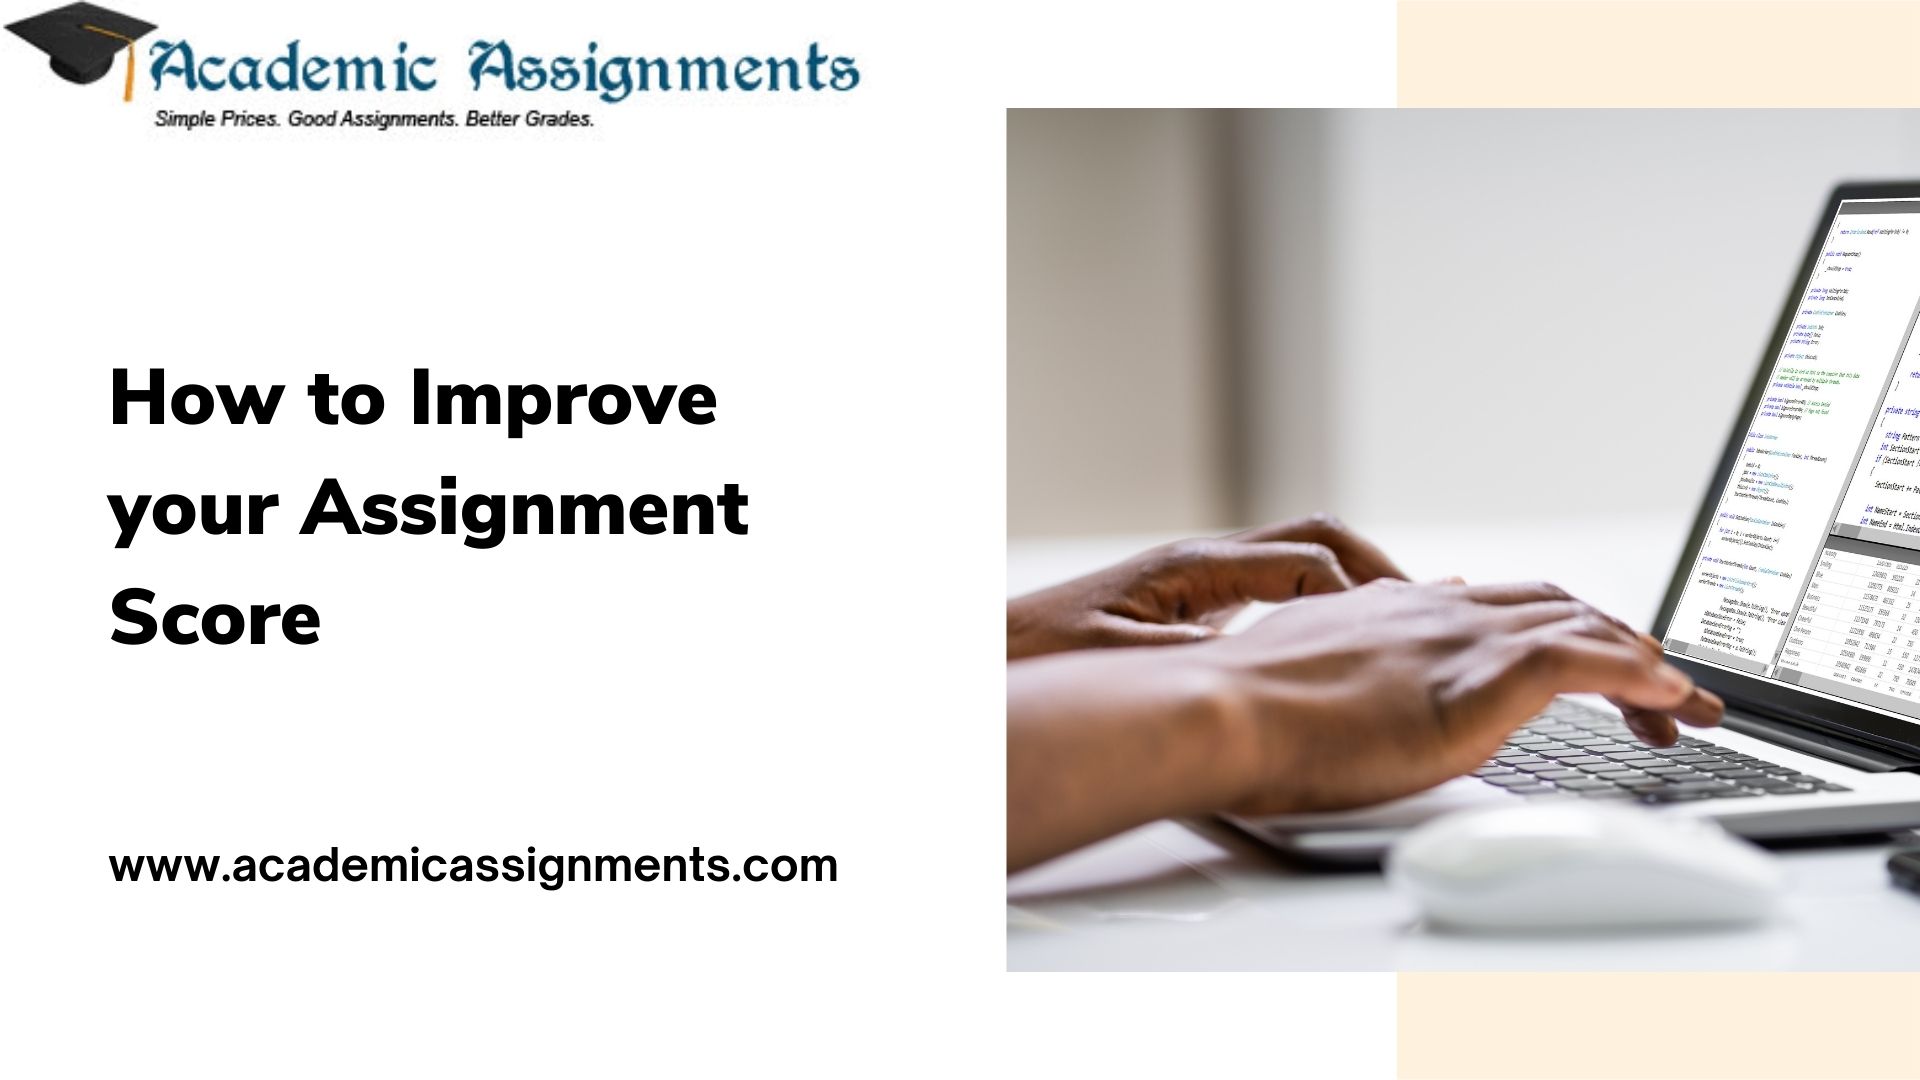 How to Improve your Assignment Score